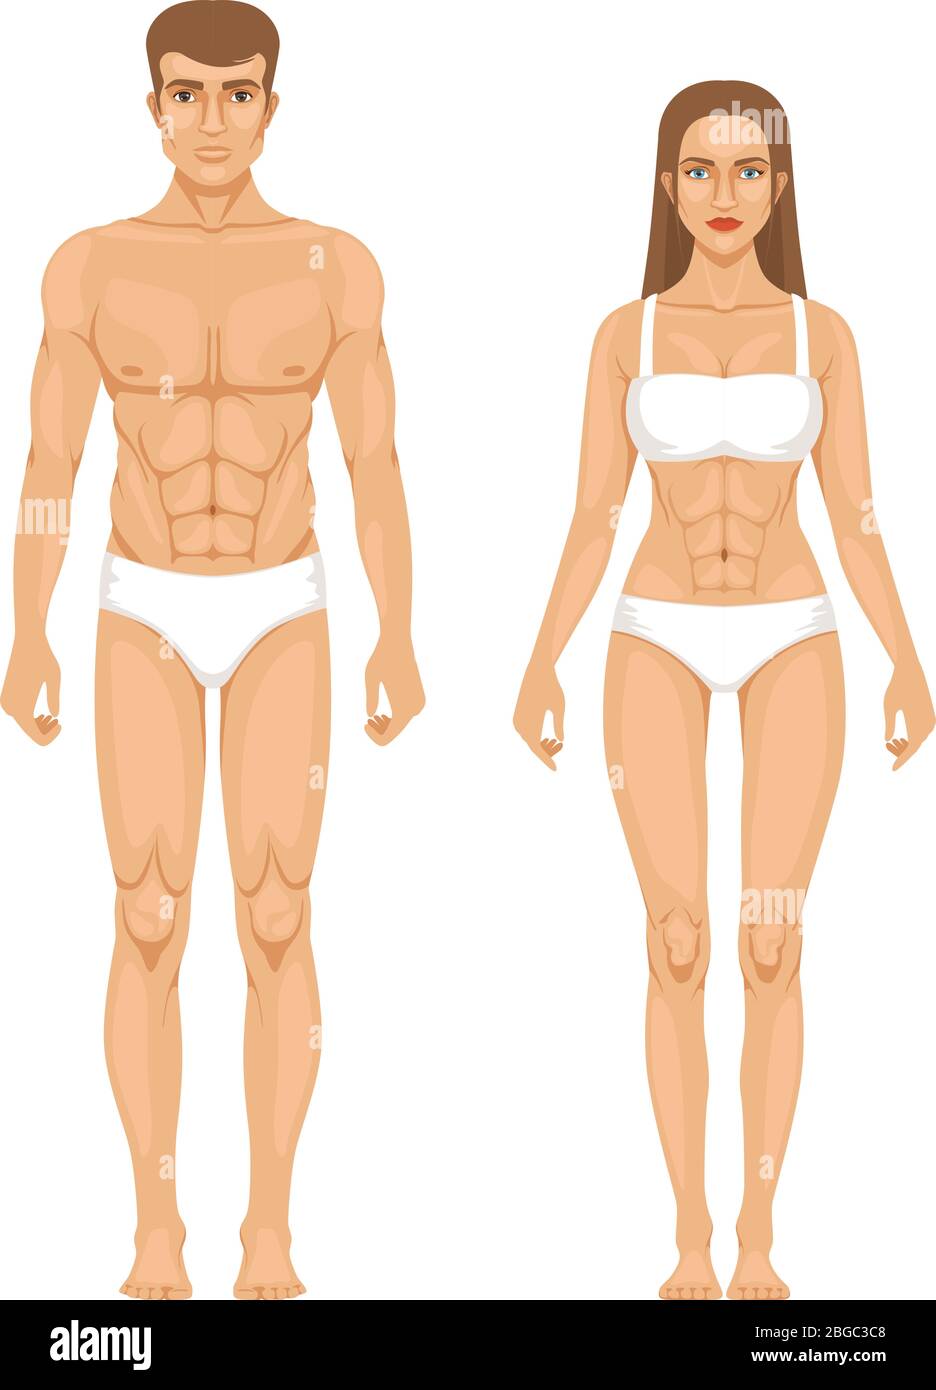 https://c8.alamy.com/comp/2BGC3C8/model-of-sporty-man-and-woman-standing-front-view-different-body-parts-vector-illustration-2BGC3C8.jpg